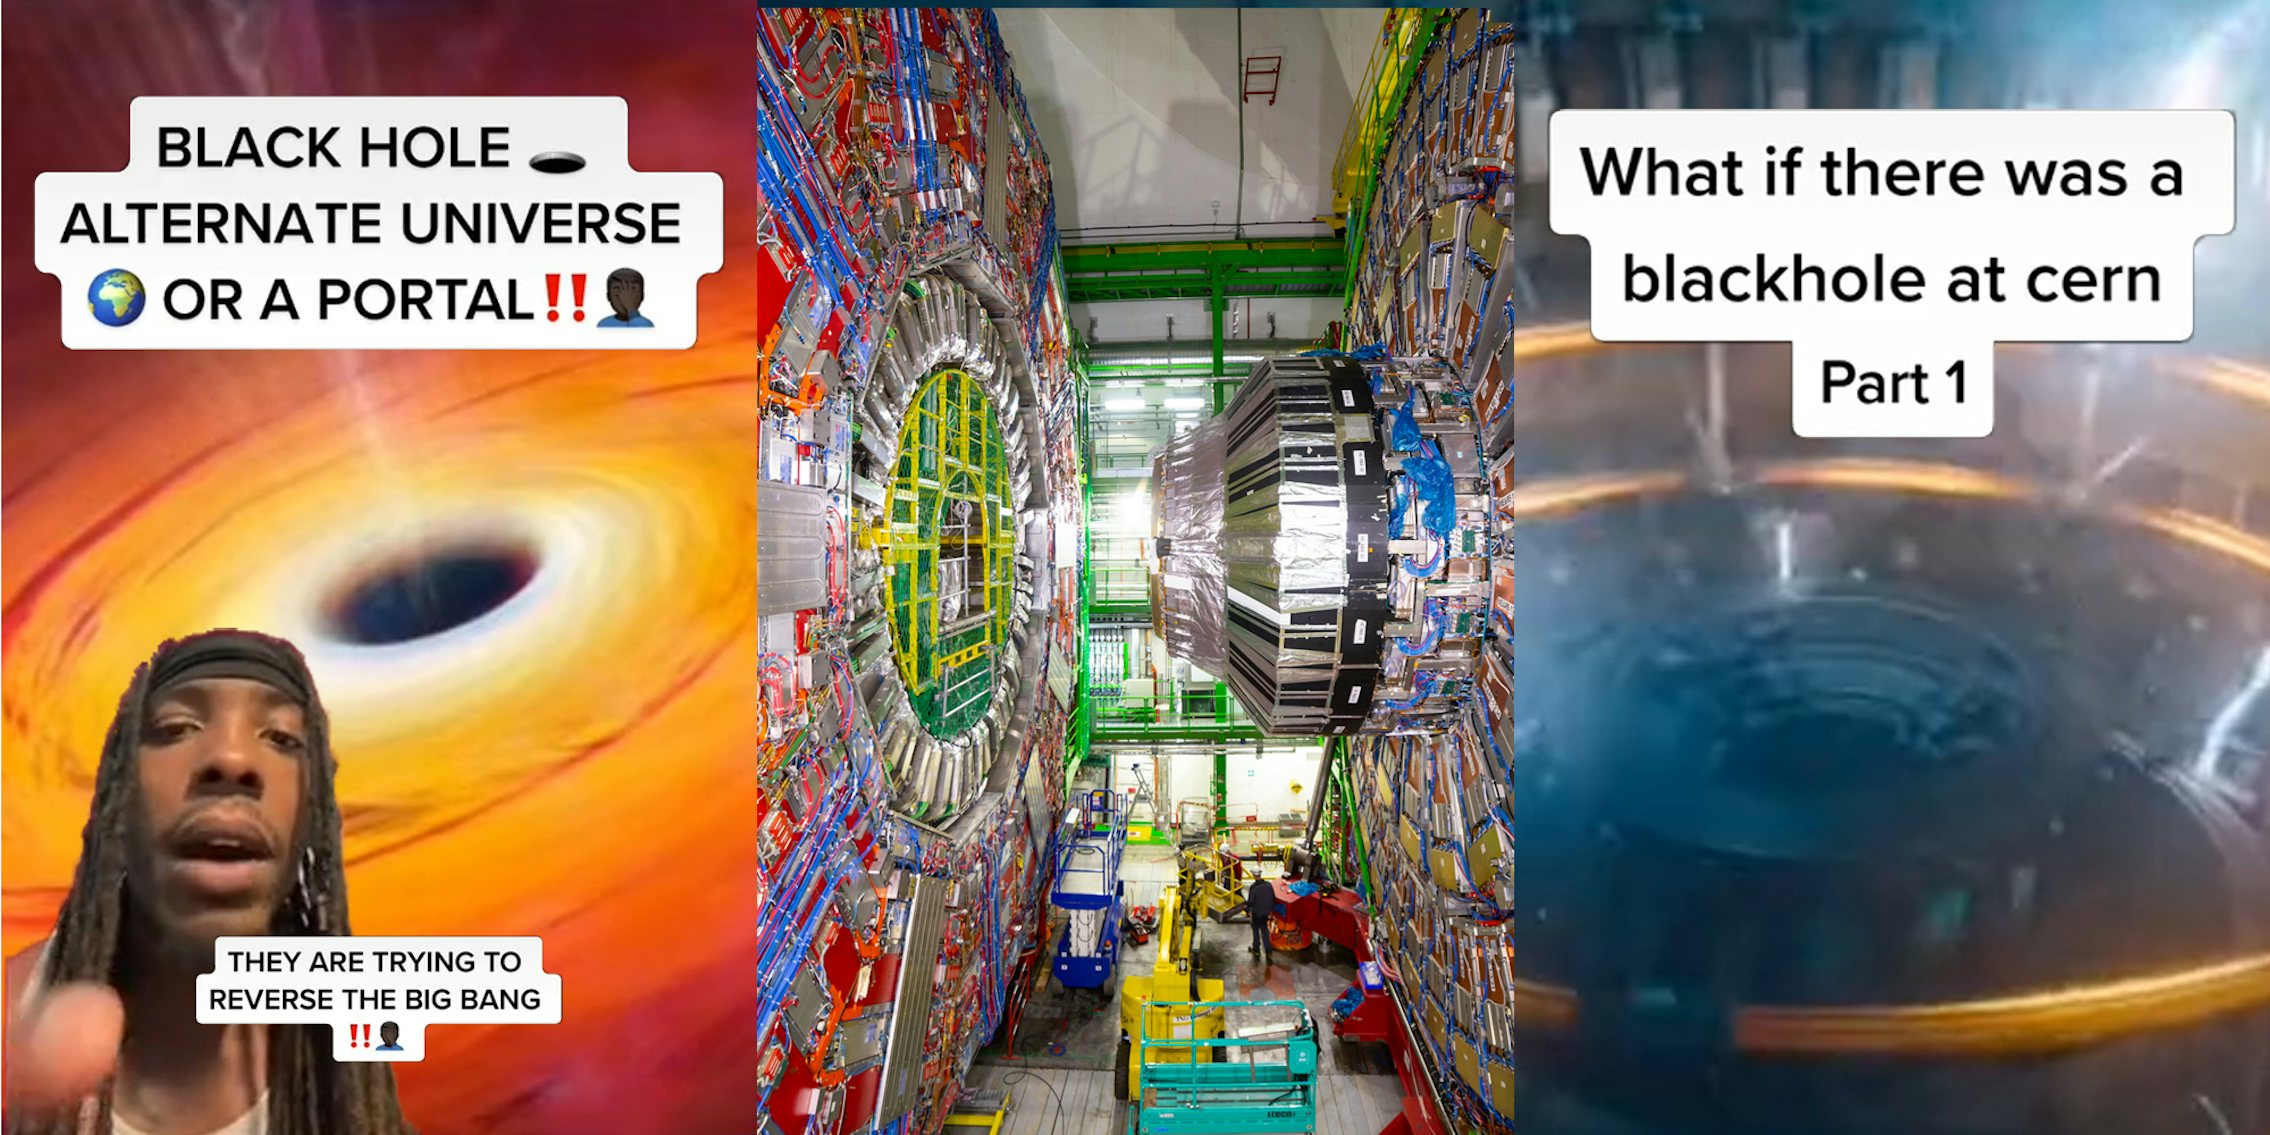 man greenscreen tiktok over image of black hole caption 'BLACK HOLE ALTERNATE UNIVERSE OR A PORTAL!! THEY ARE TRYING TO REVERSE THE BIG BANG!!' (l) CERN LHC (c) Hadron Collider movie clip background caption 'What if there was a black hole at cern Part 1' (r)